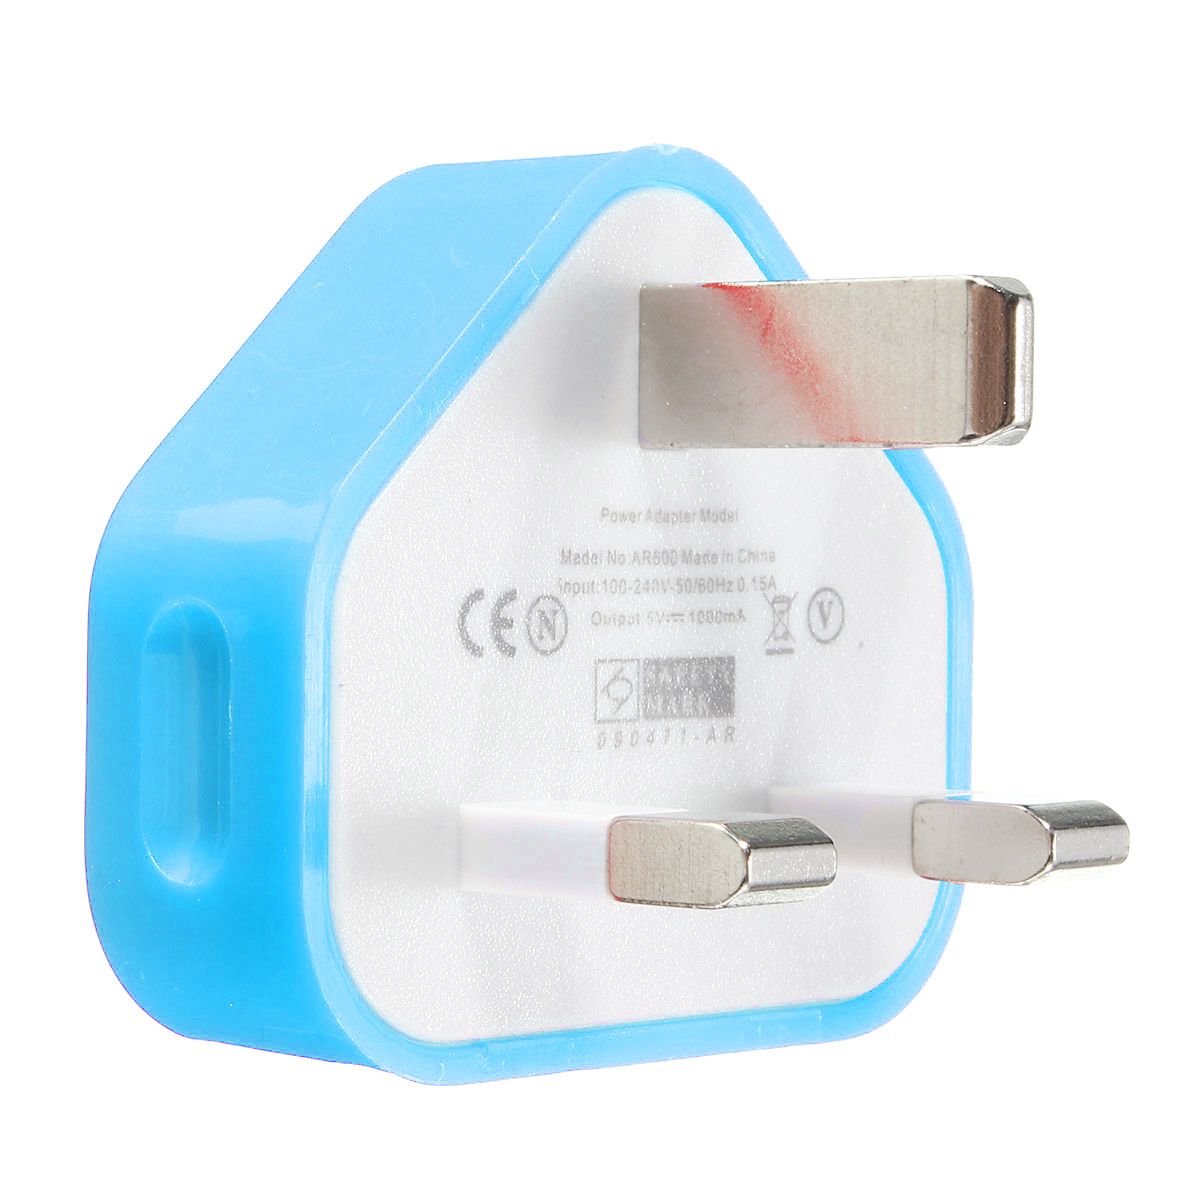 UK-USB-Plug-Charger-Mains-Wall-Home-Adapter-For-Samsung-Android-Phone-Tablets-1191576-7